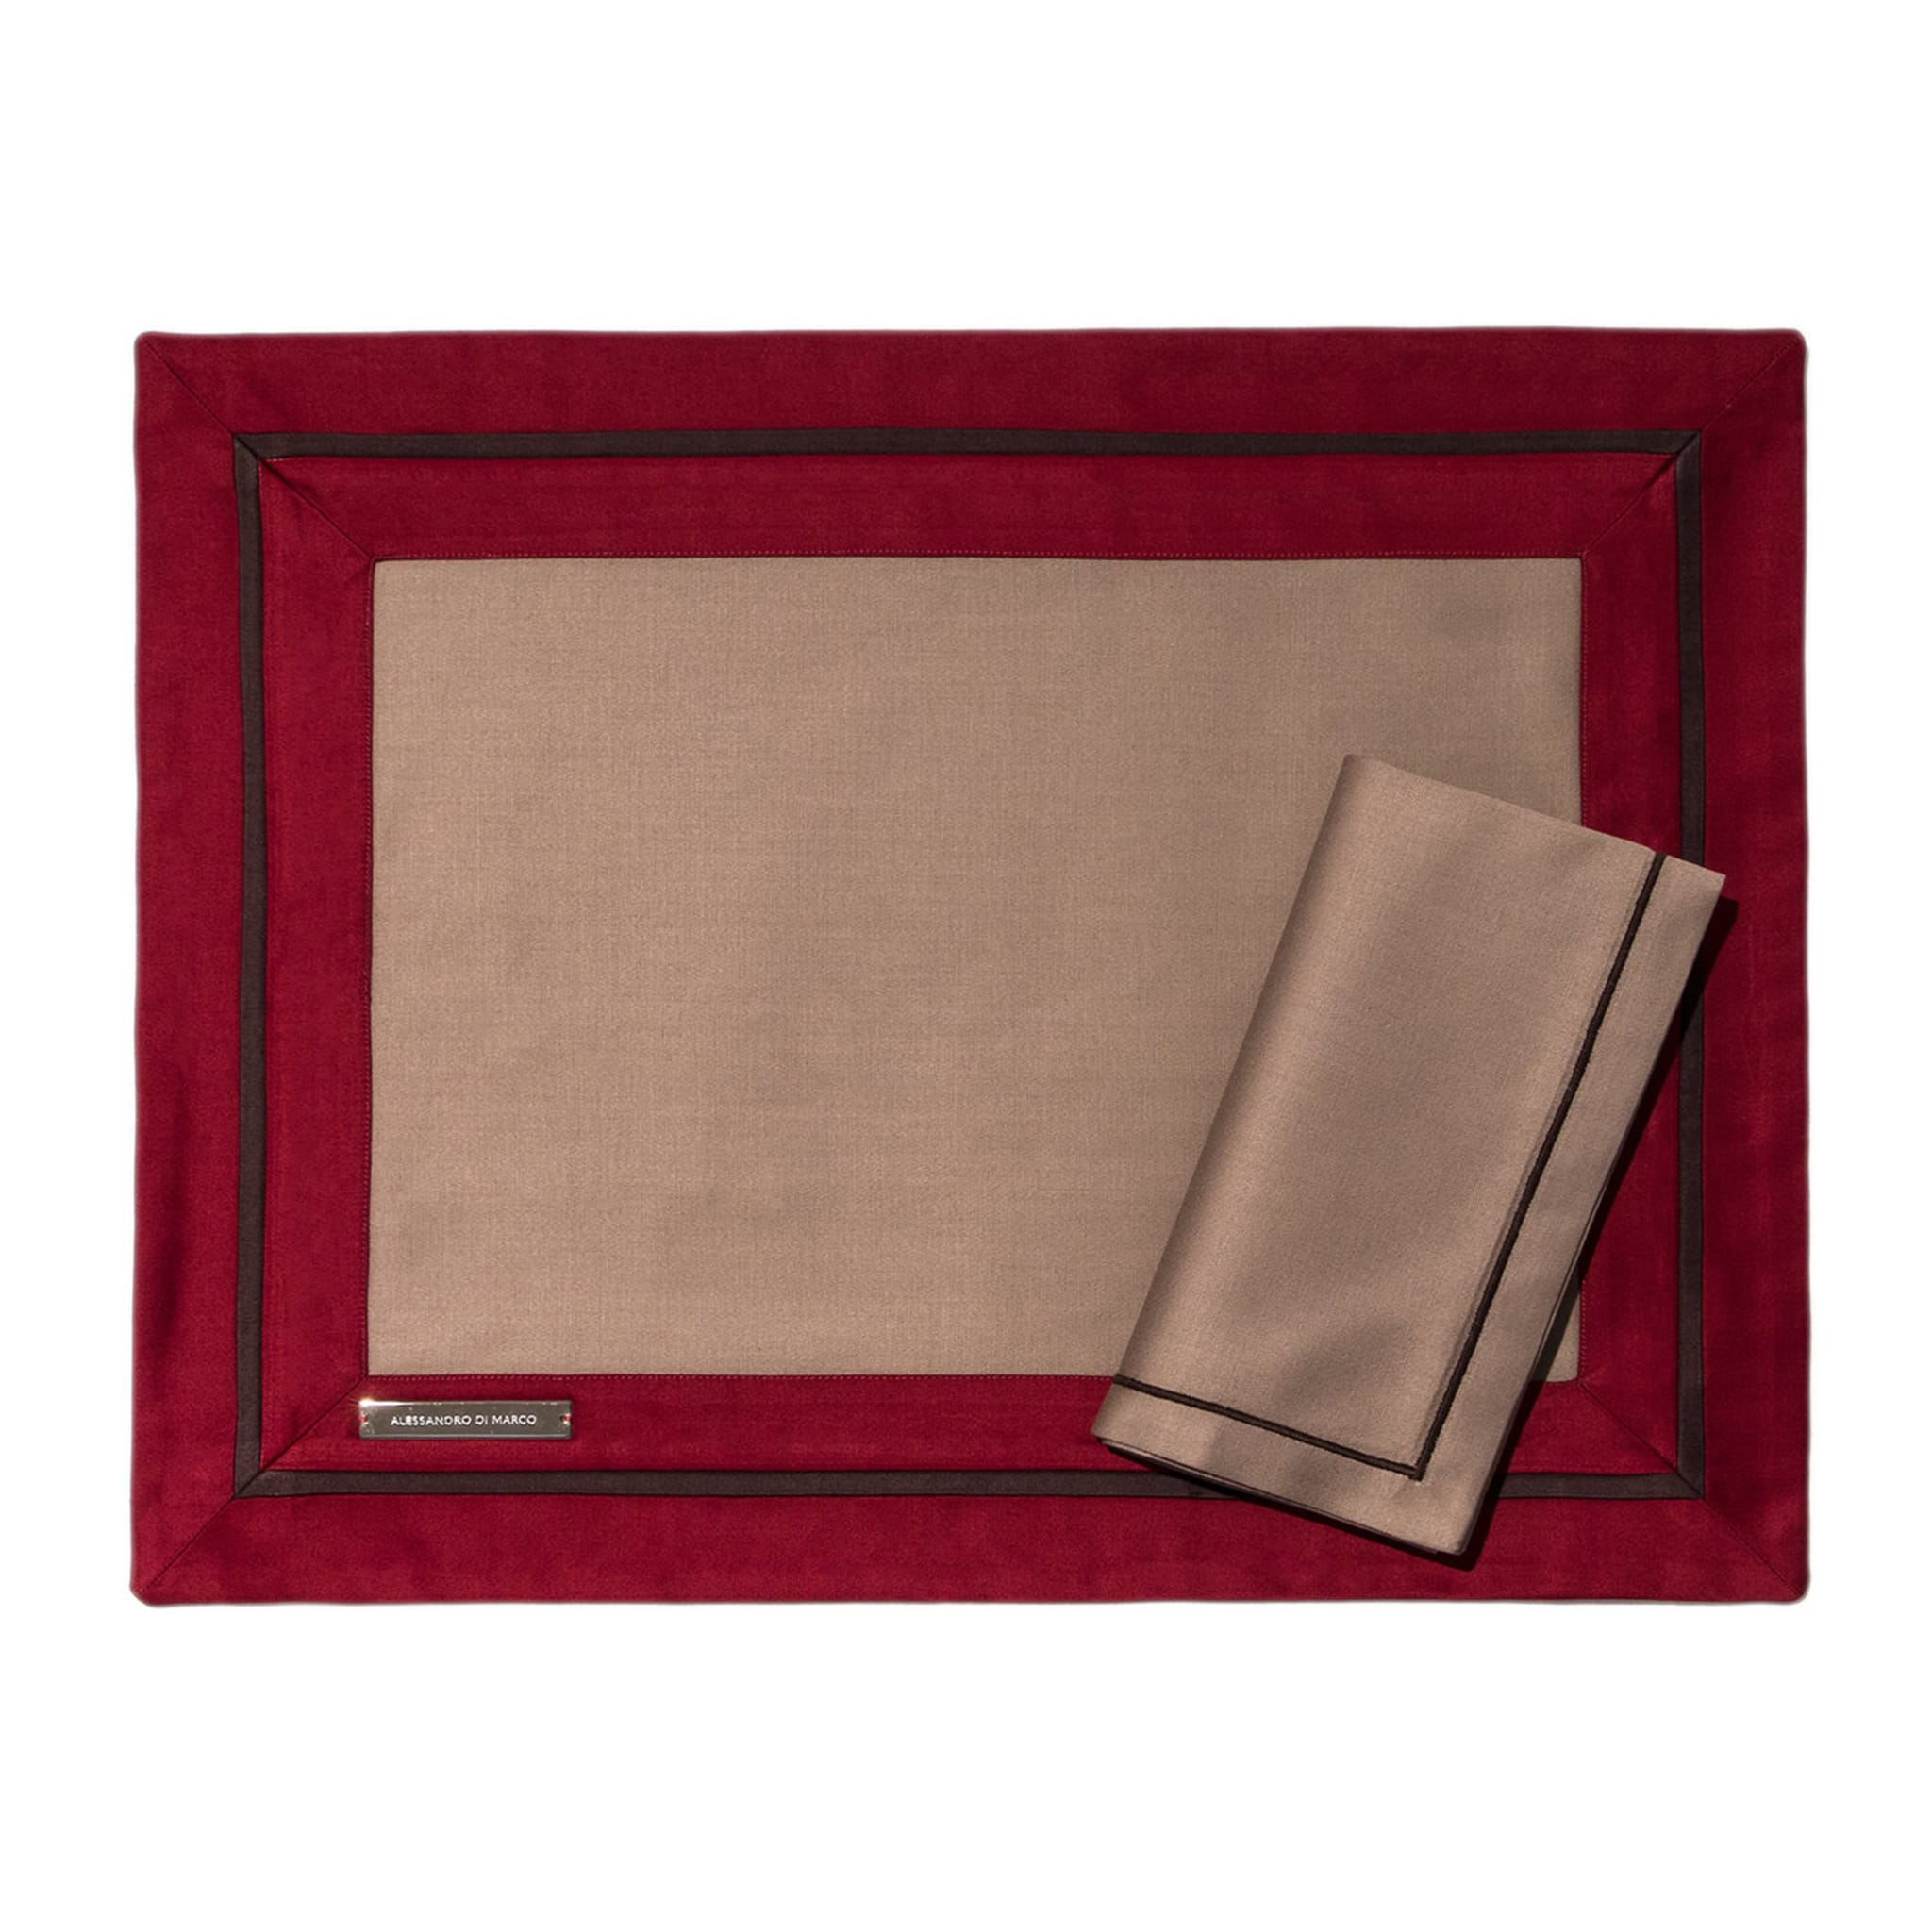 Placemats and Napkins - Red and Beige - Alternative view 1